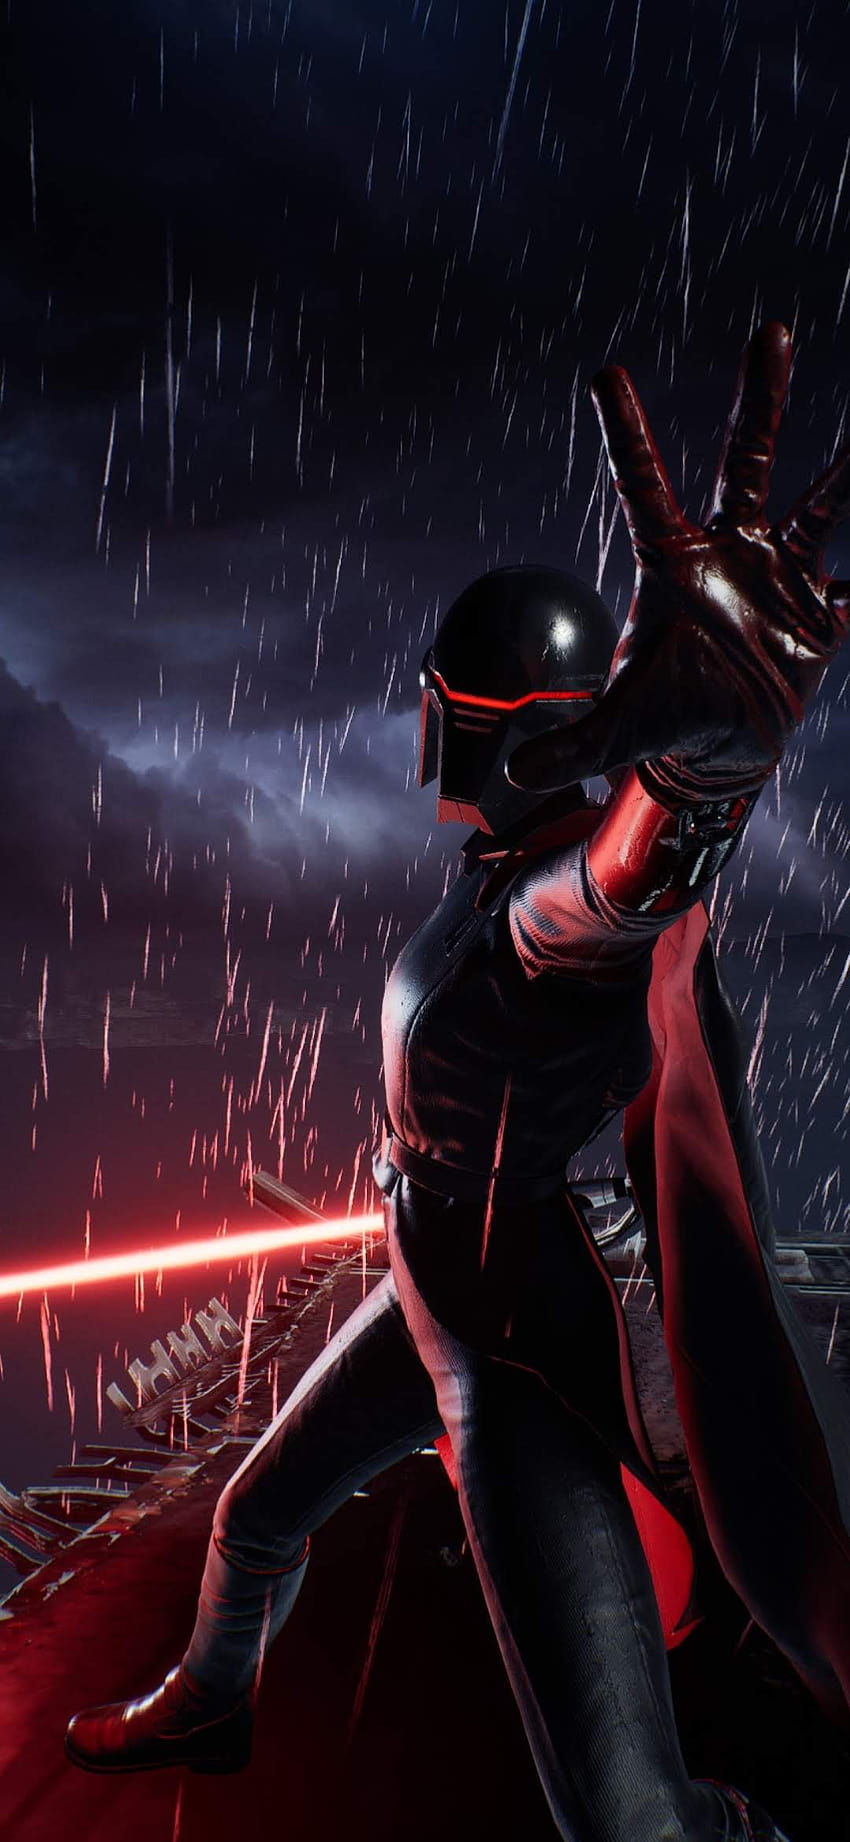 Star Wars Second Sister Inquisitor HD phone wallpaper